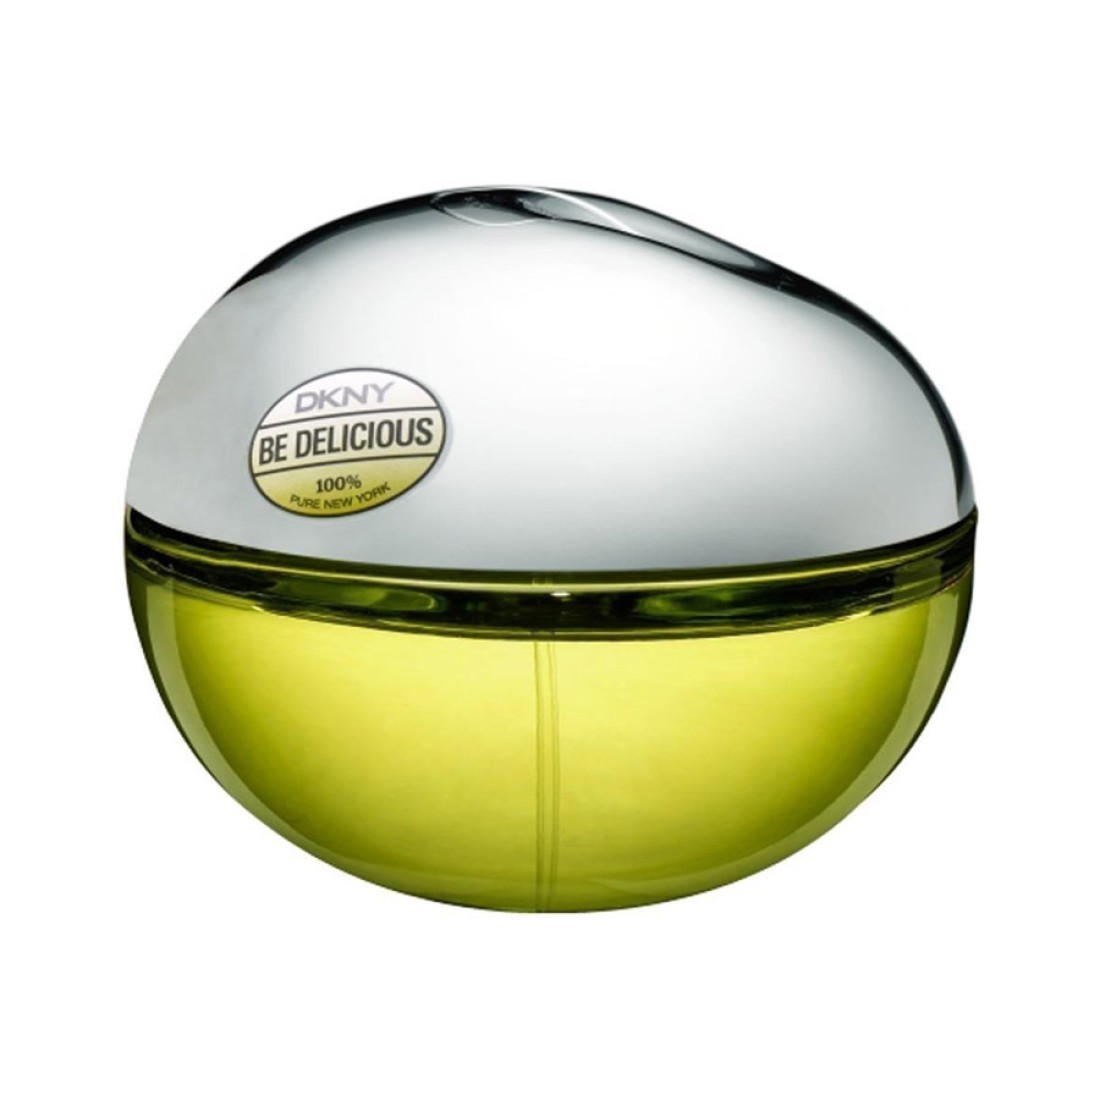 Donna karan dkny be delicious. DKNY be delicious 100 мл. Донна Каран be delicious. Donna Karan DKNY be delicious for women.